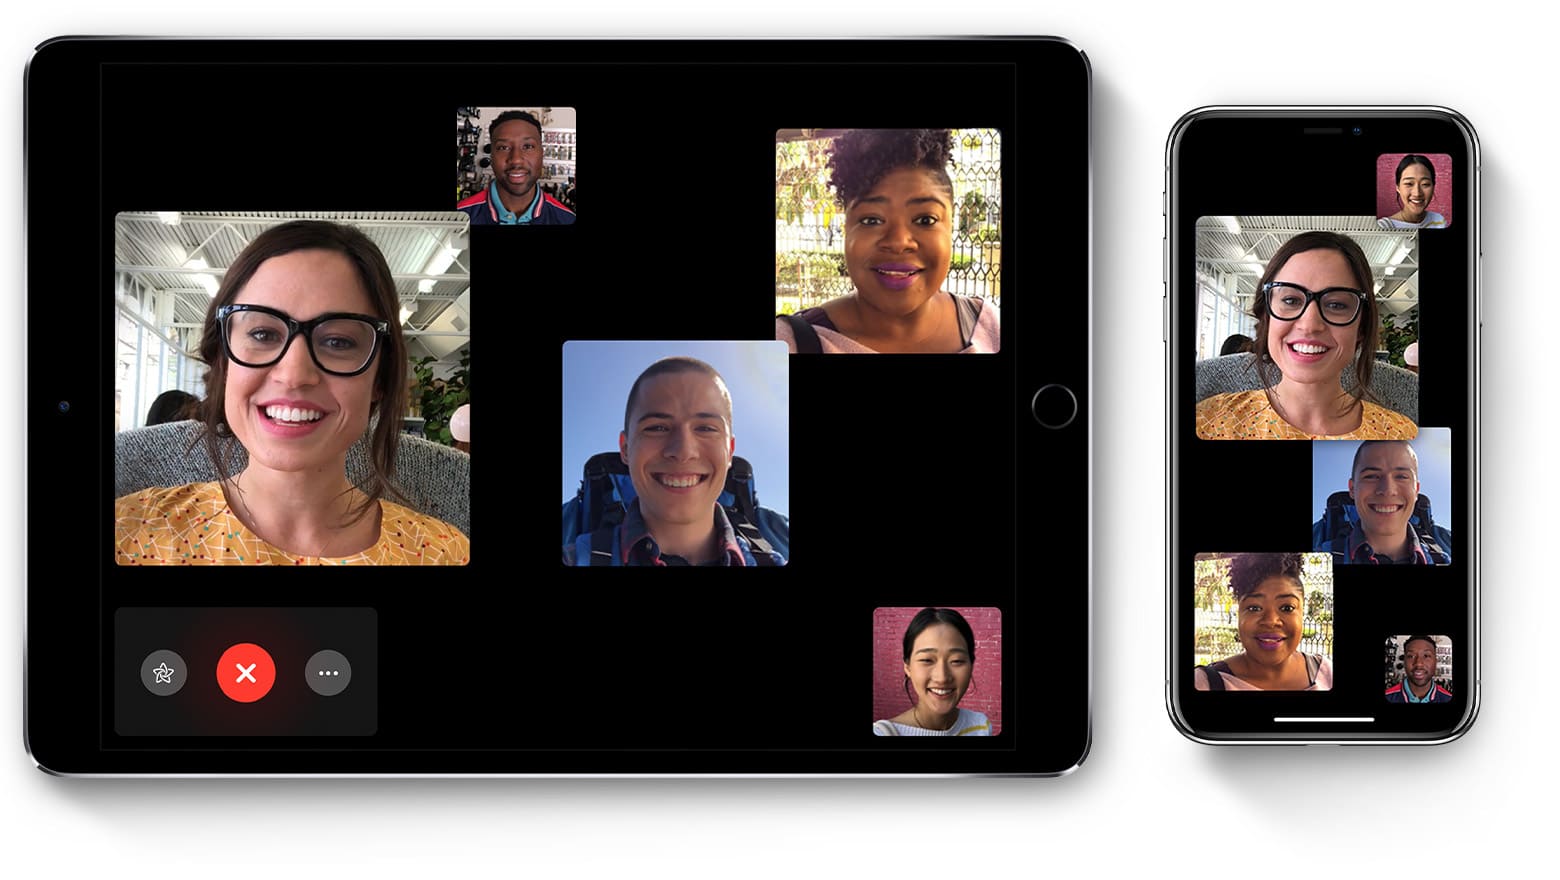 Group FaceTime is super easy to use.